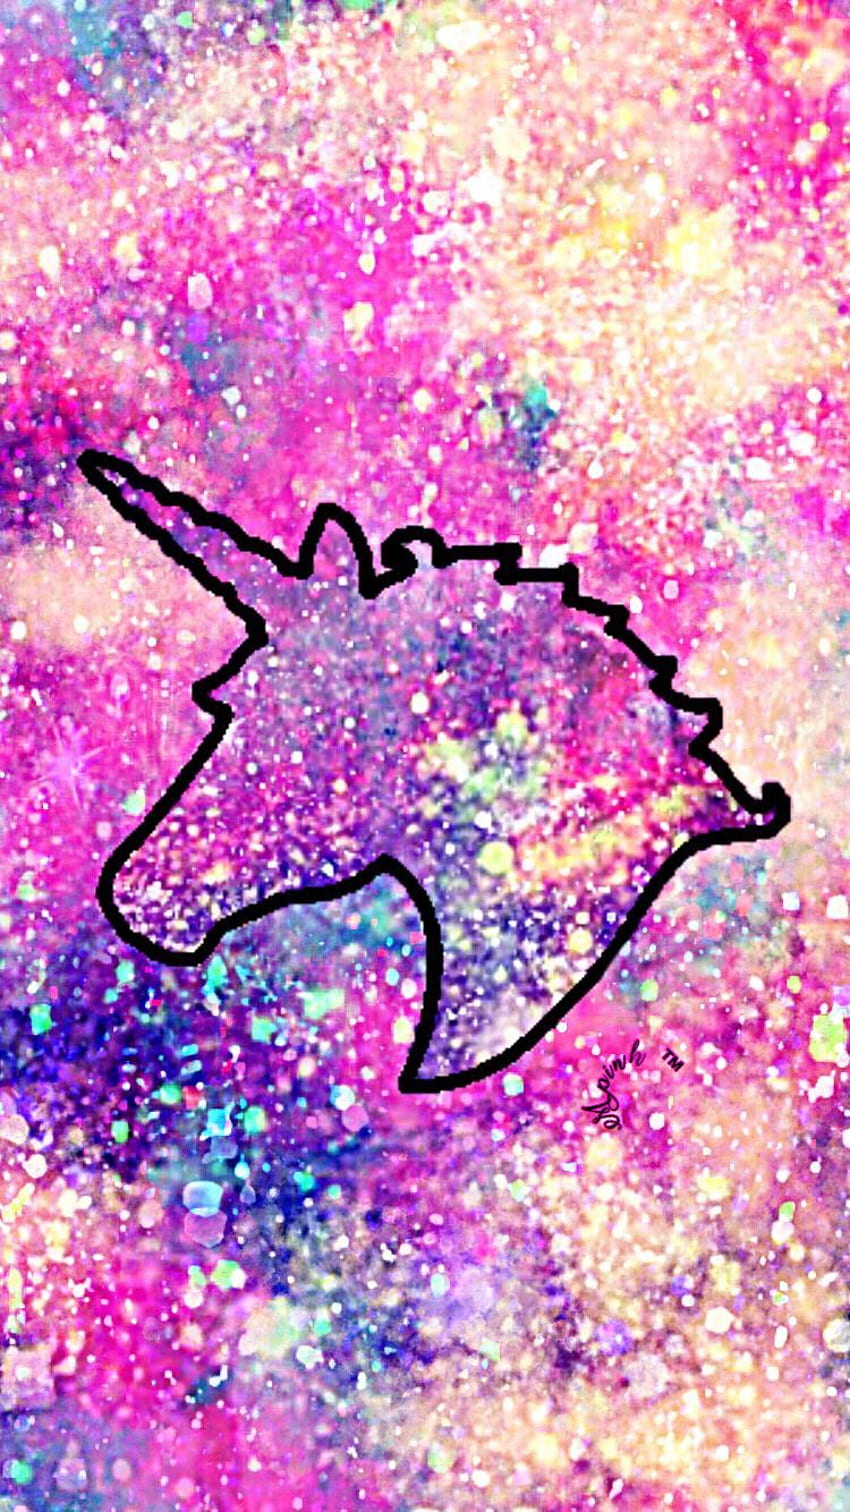 Unicorn Galaxy IPhone Android wallpaper ponsel HD